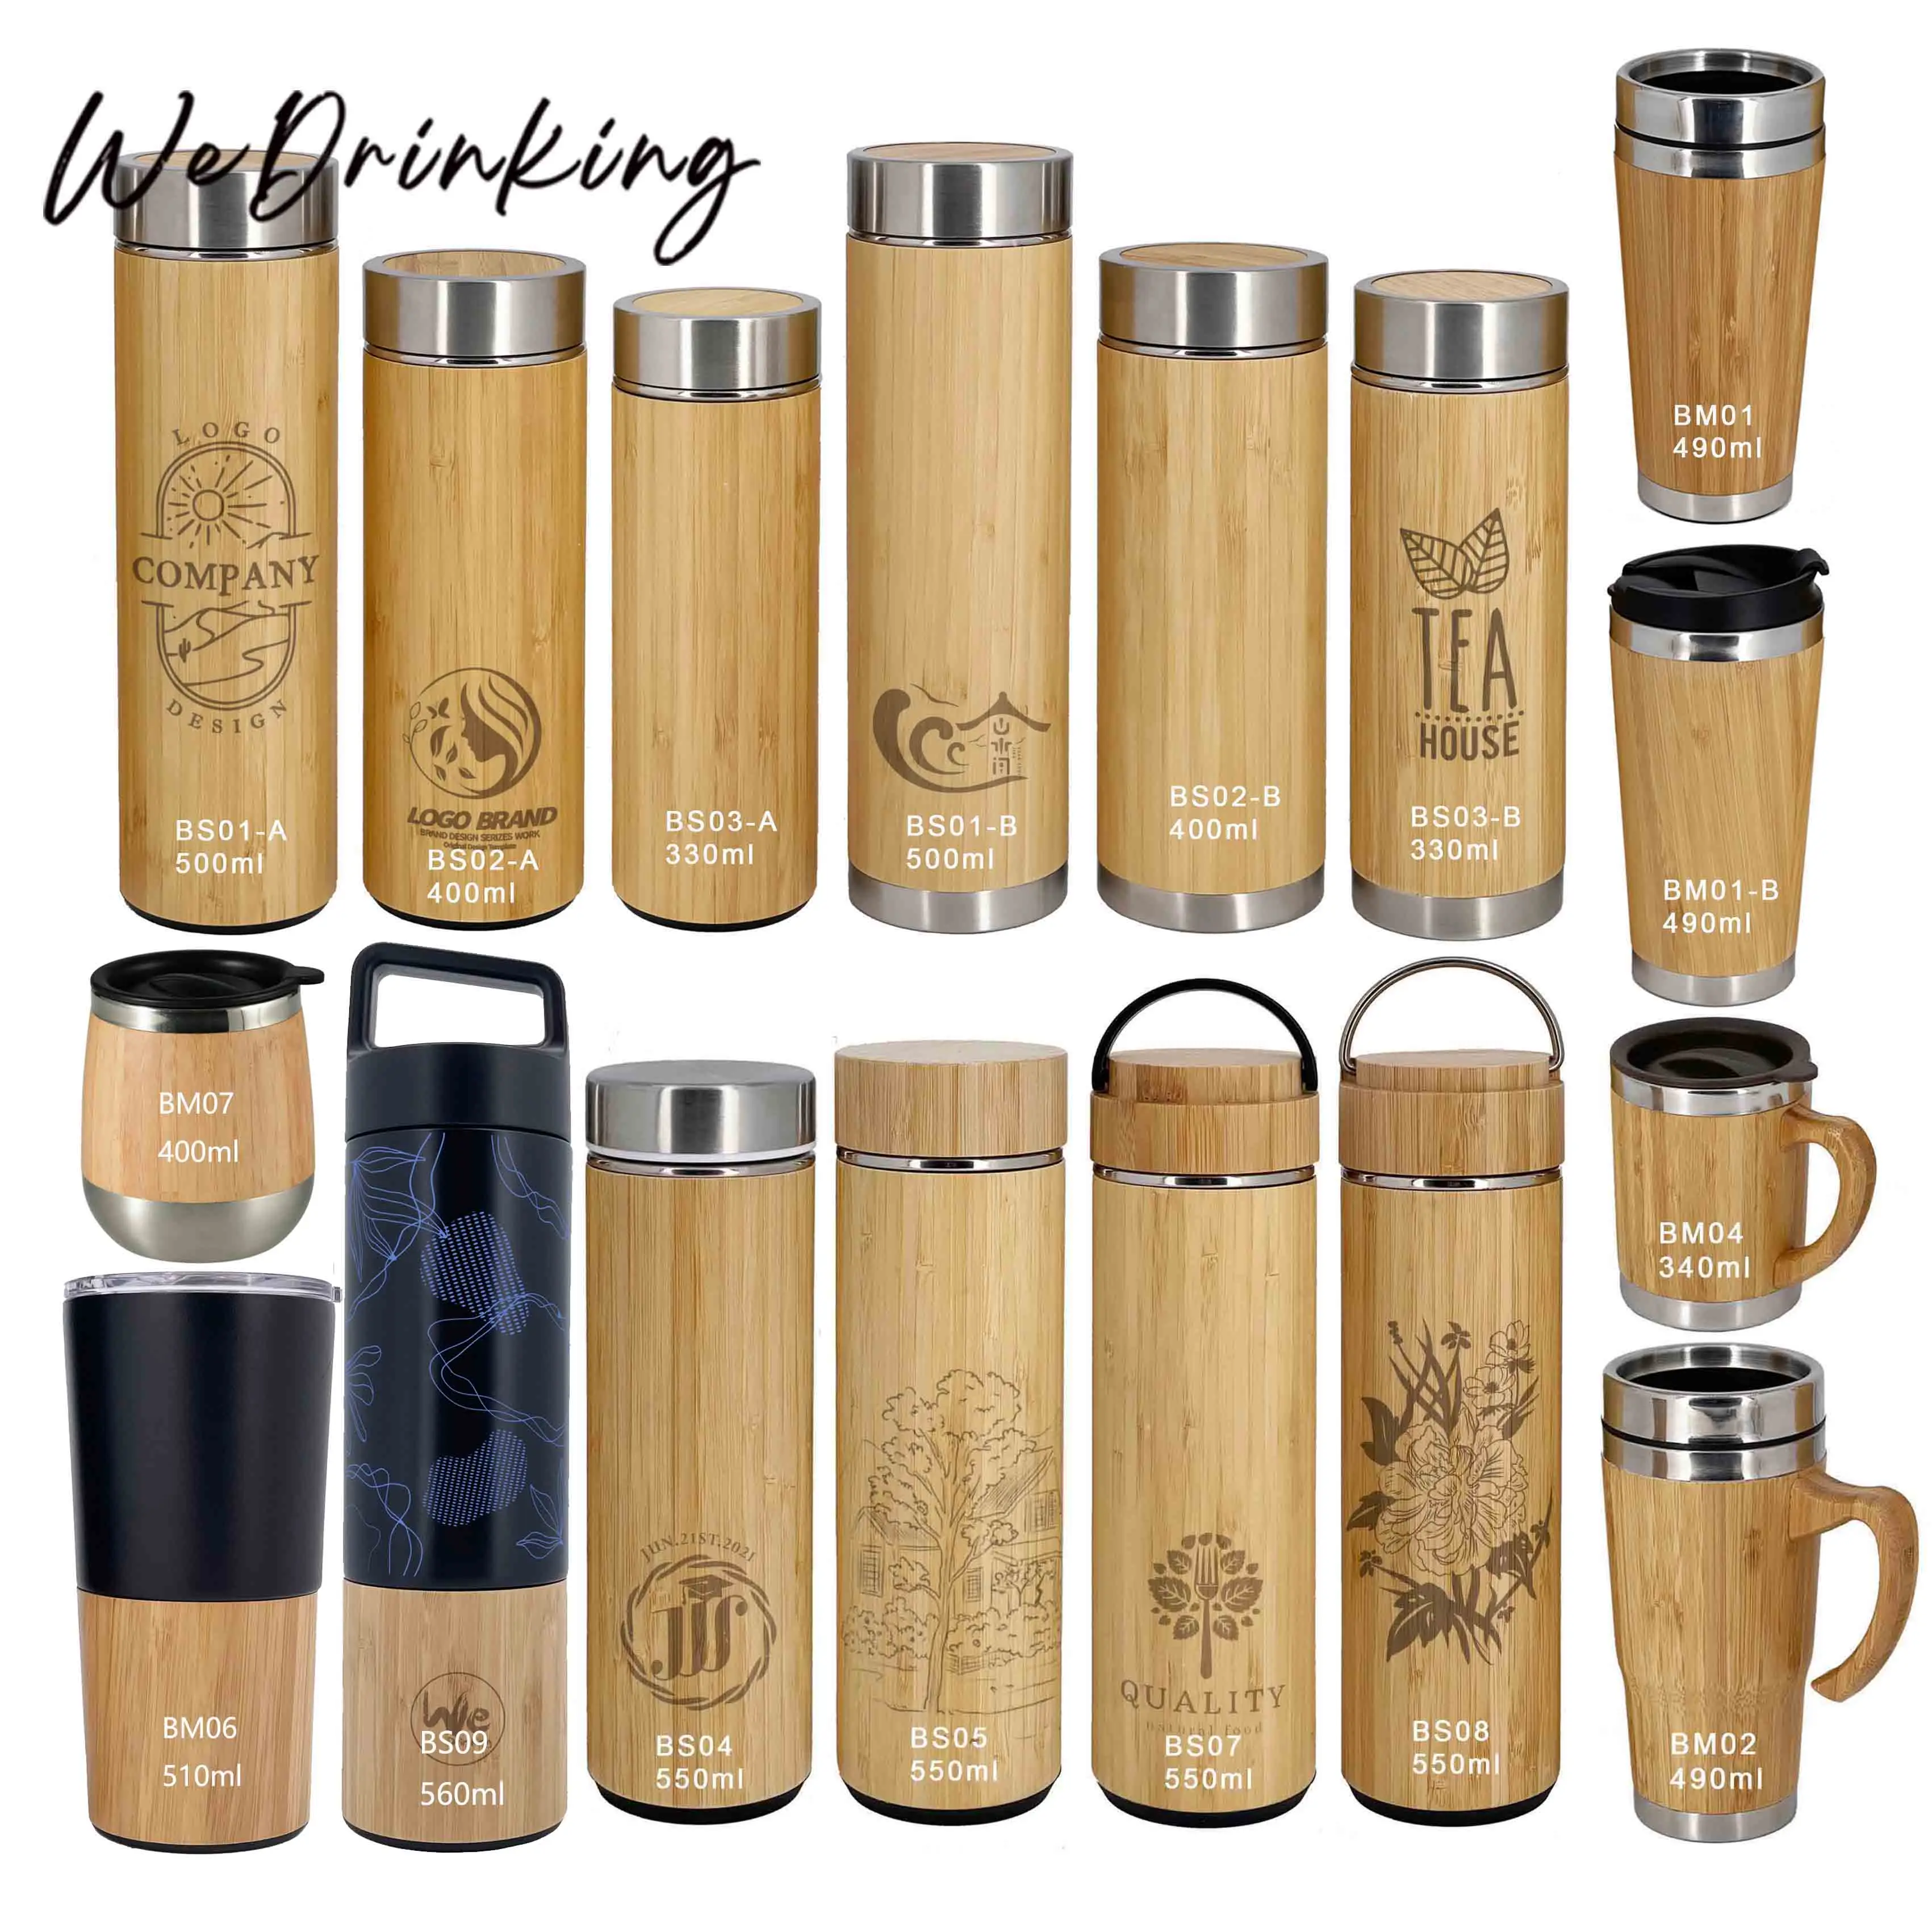 

BS04 550ml Original Bamboo Vacuum Tea Flask with Infuser and Strainer for Brewing Loose Leaf and Detox Tea Lovers